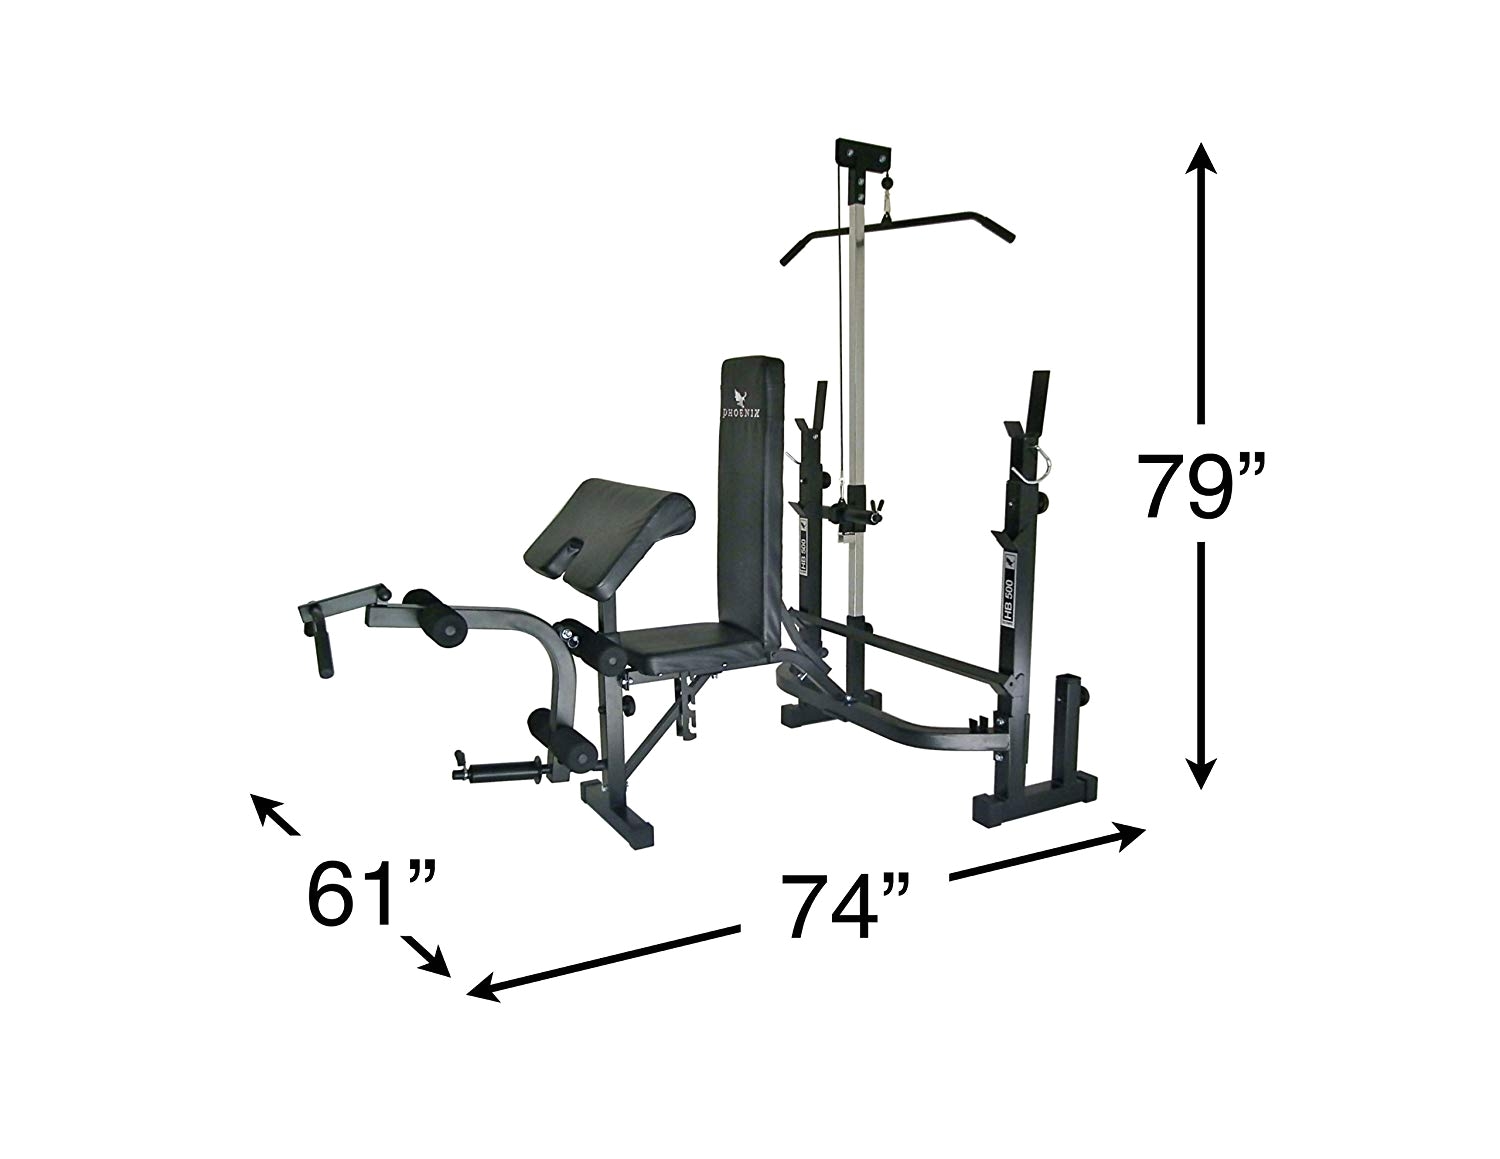 amazon com phoenix 99225 power bench mid width adjustable weight benches sports outdoors